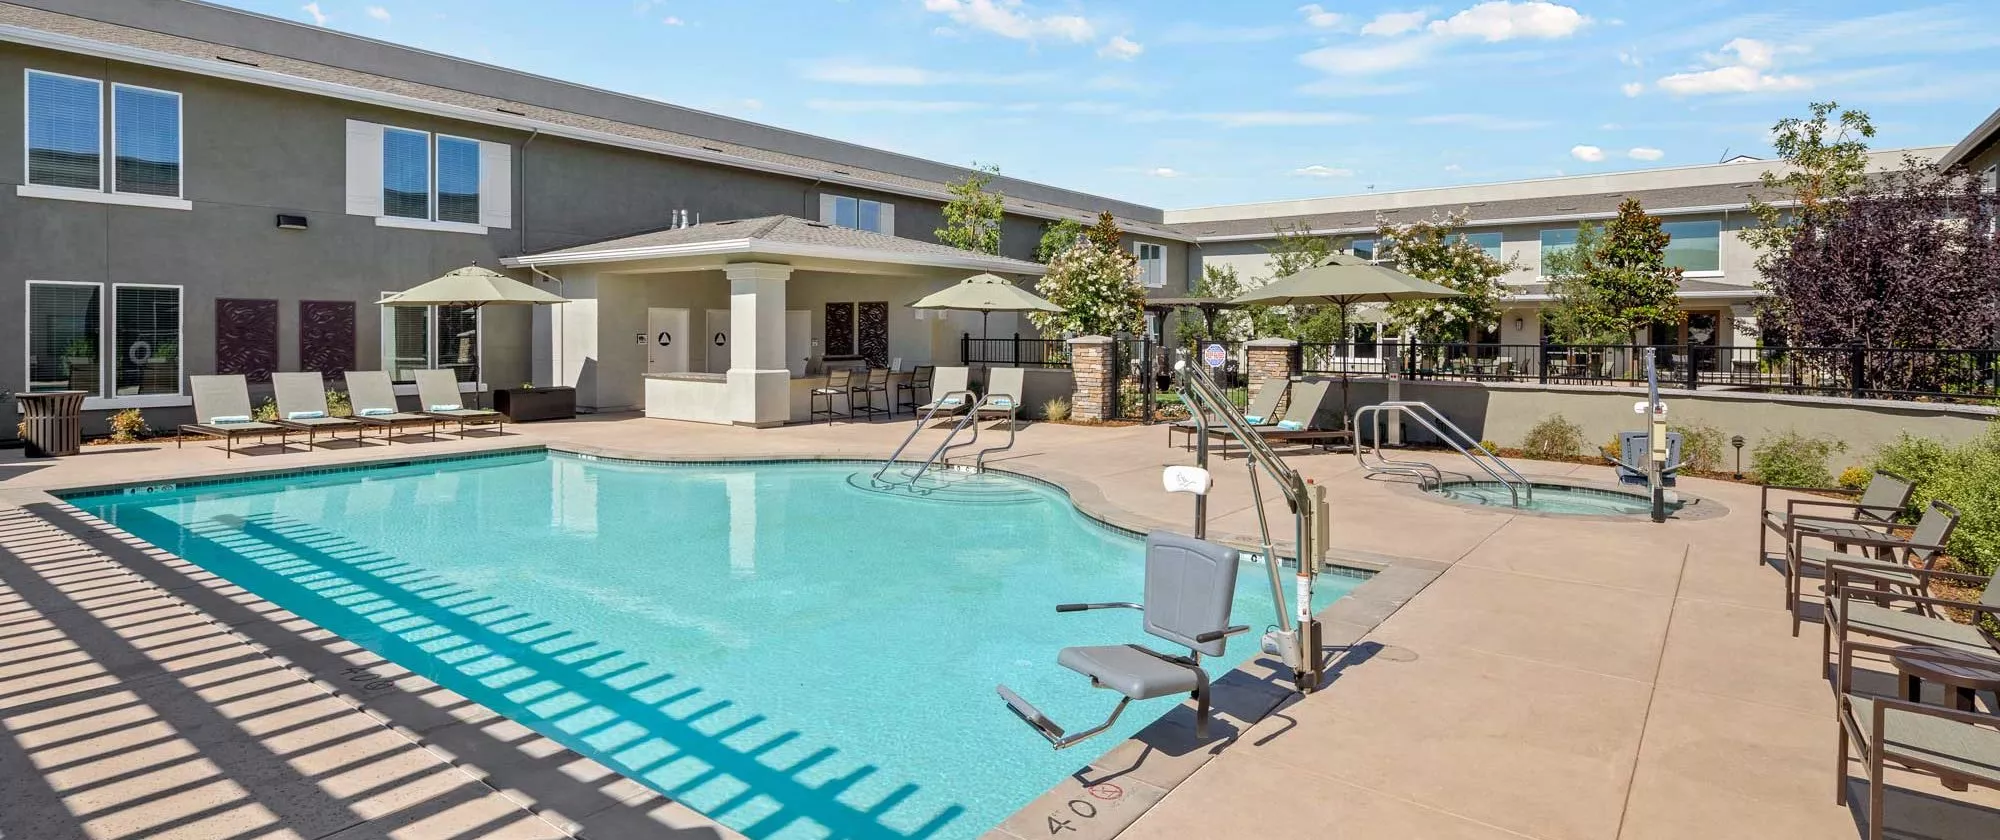 Lodi outdoor pool, hot tub and lounge chairs